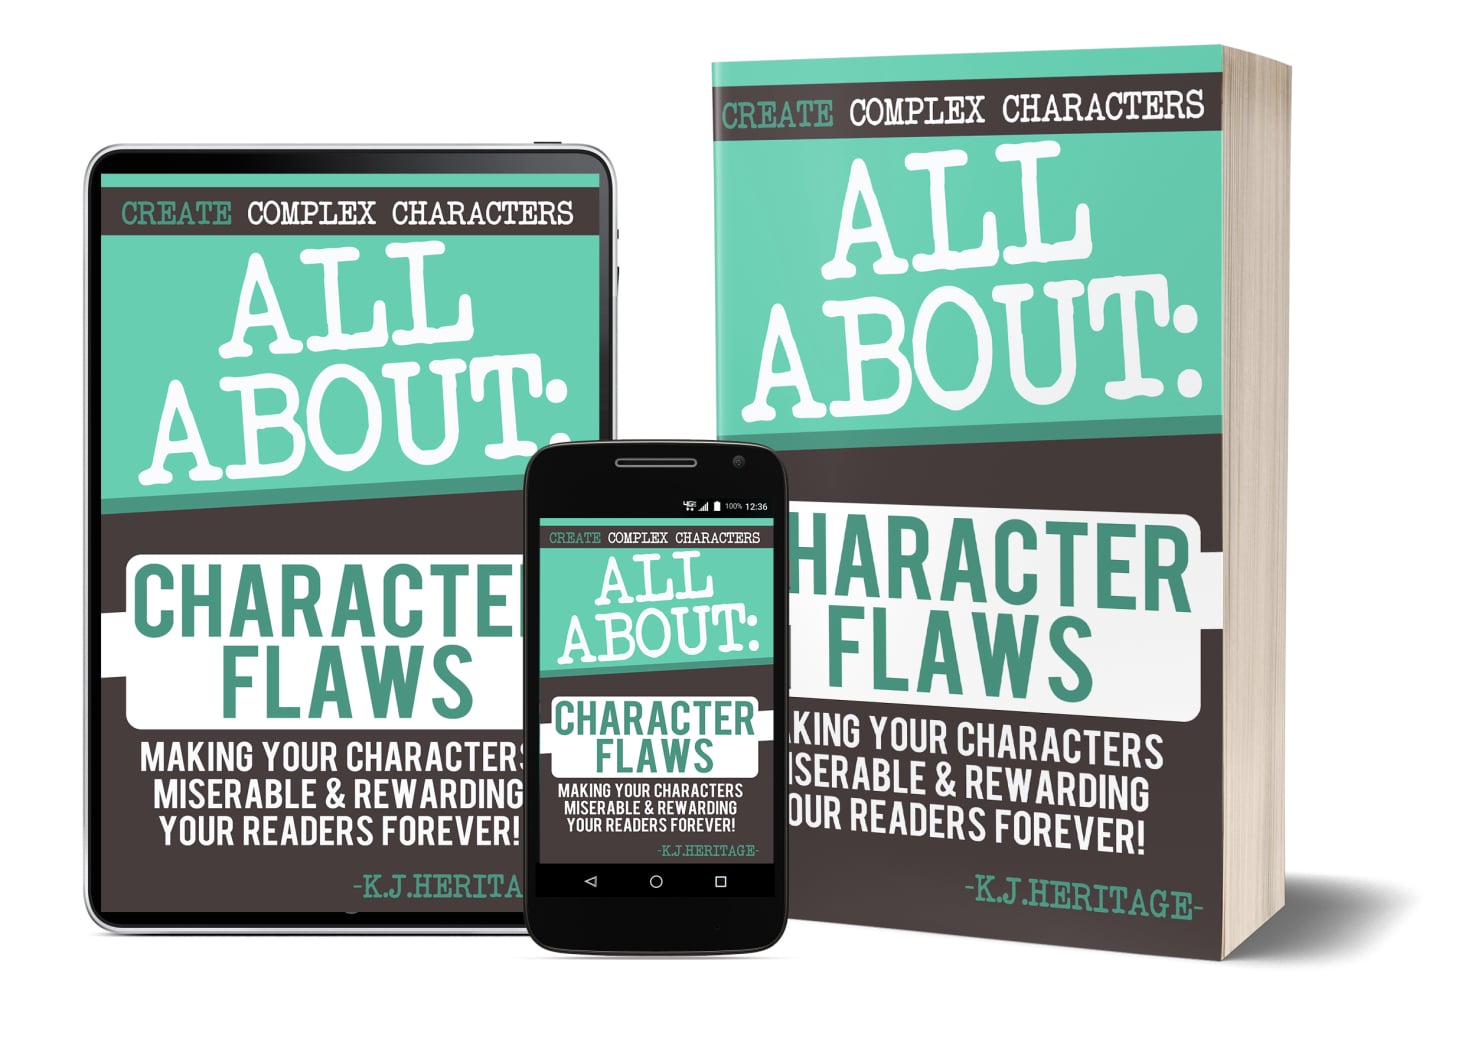 All About character flaws